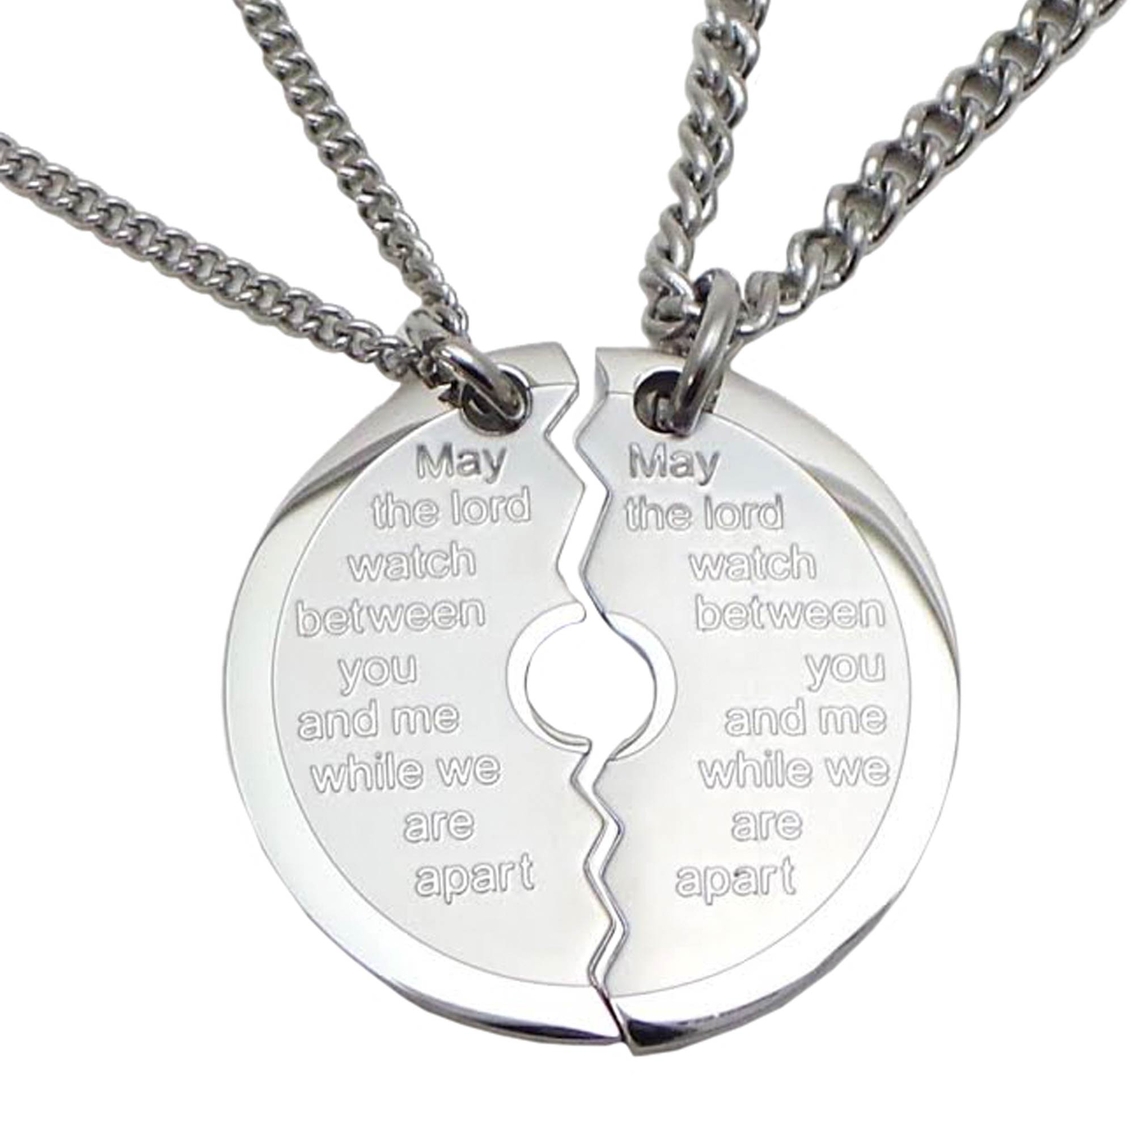 Shields of Strength Stainless Steel Large Split Weight Necklace Genesis 31:49 - Image 2 of 2